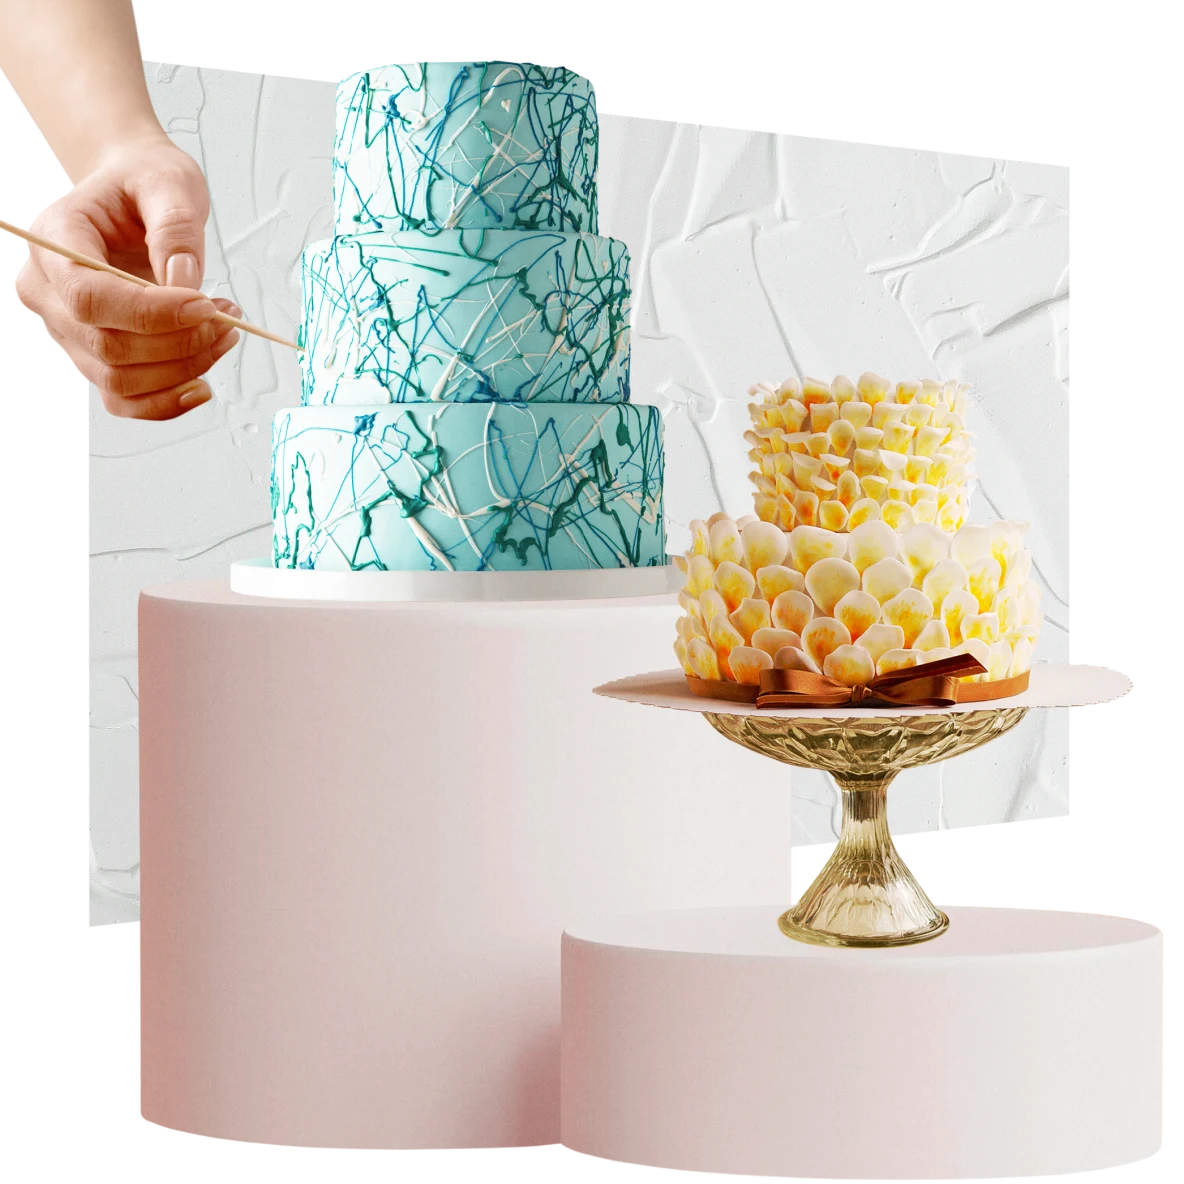 A light green, three-tier cake is on the left, with a smaller yellow and white, two-tier cake on the right. A white hand applies details to the cake on the left. White frosting is in the background.